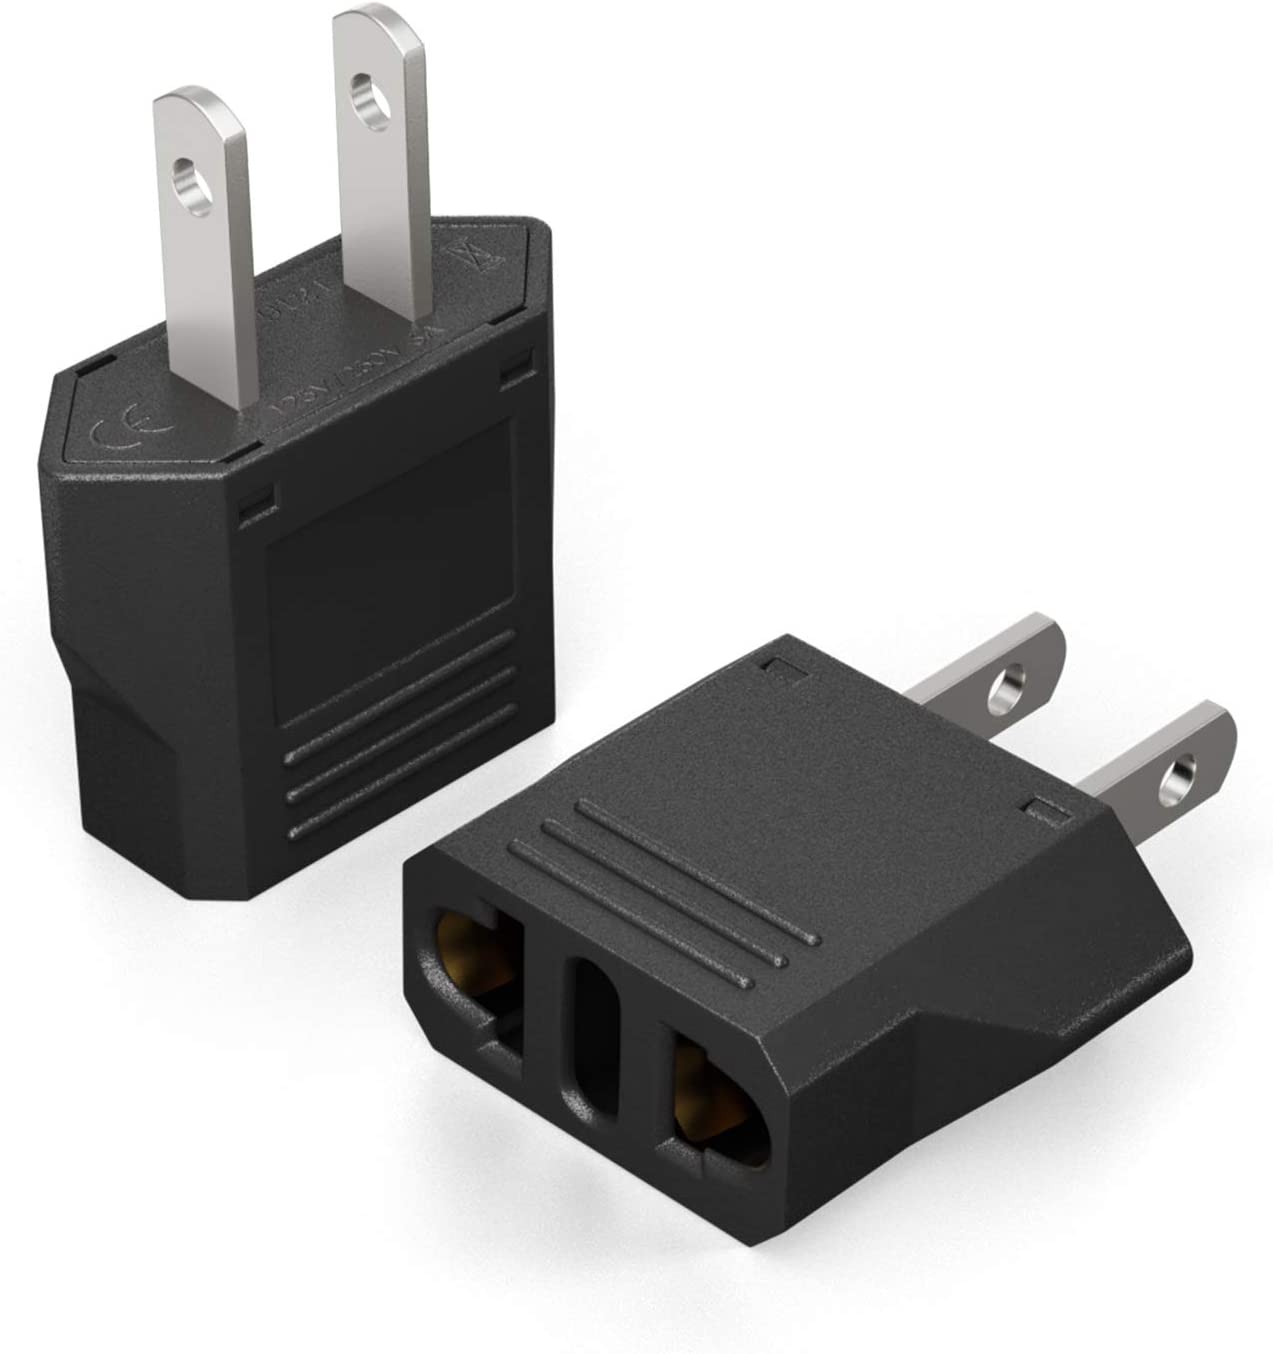 MF-7 European To American Outlet Plug Adapter Black EU To US Travel Power Adapter Converter Plug Type A